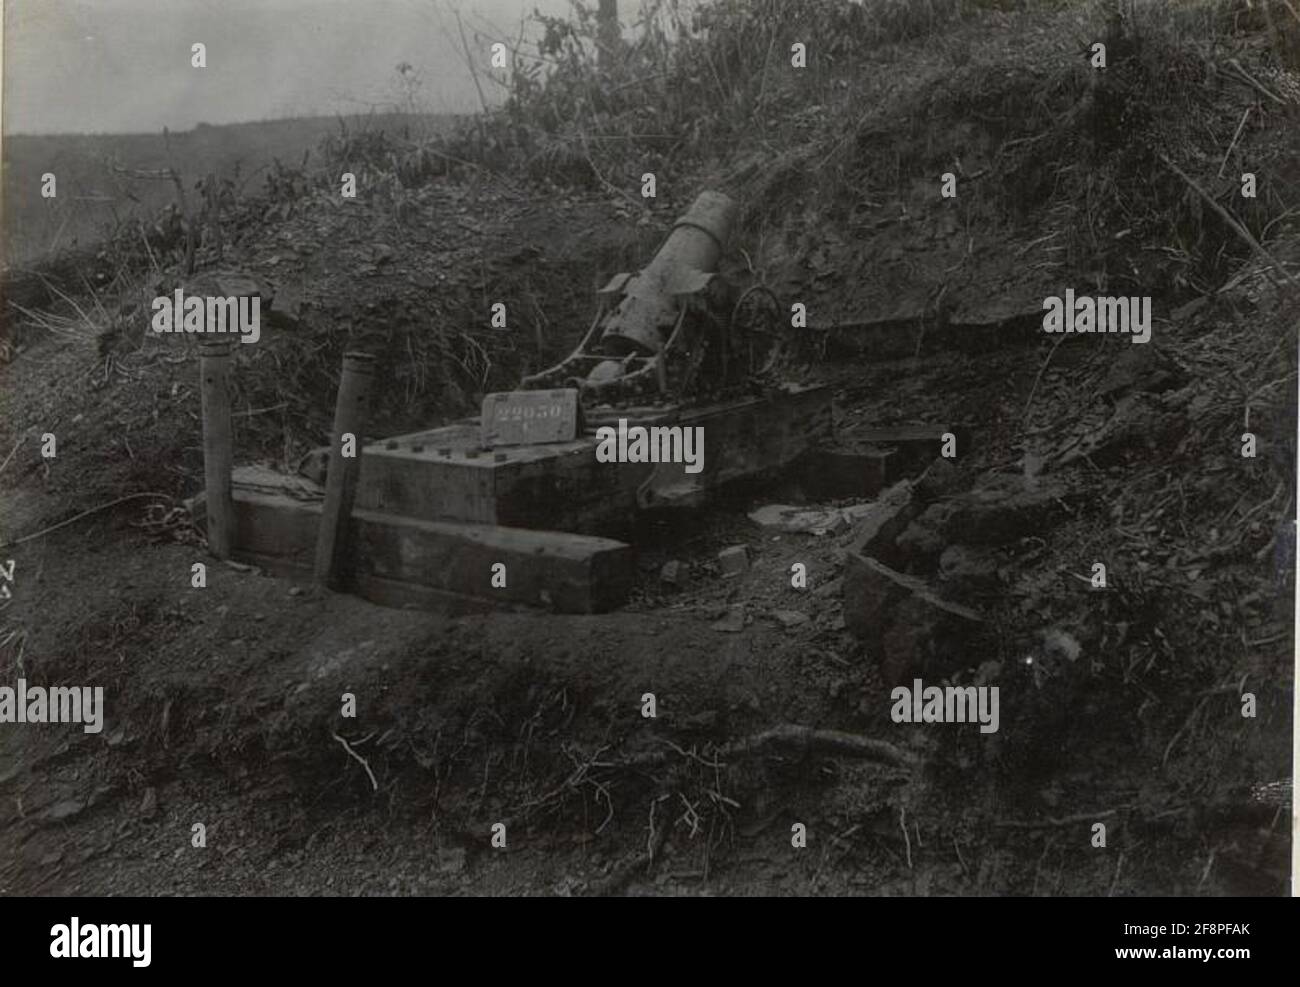 Built-in ITL.15cm mortar in fire position. Podgorahöhe. (Early April 1918.). Stock Photo